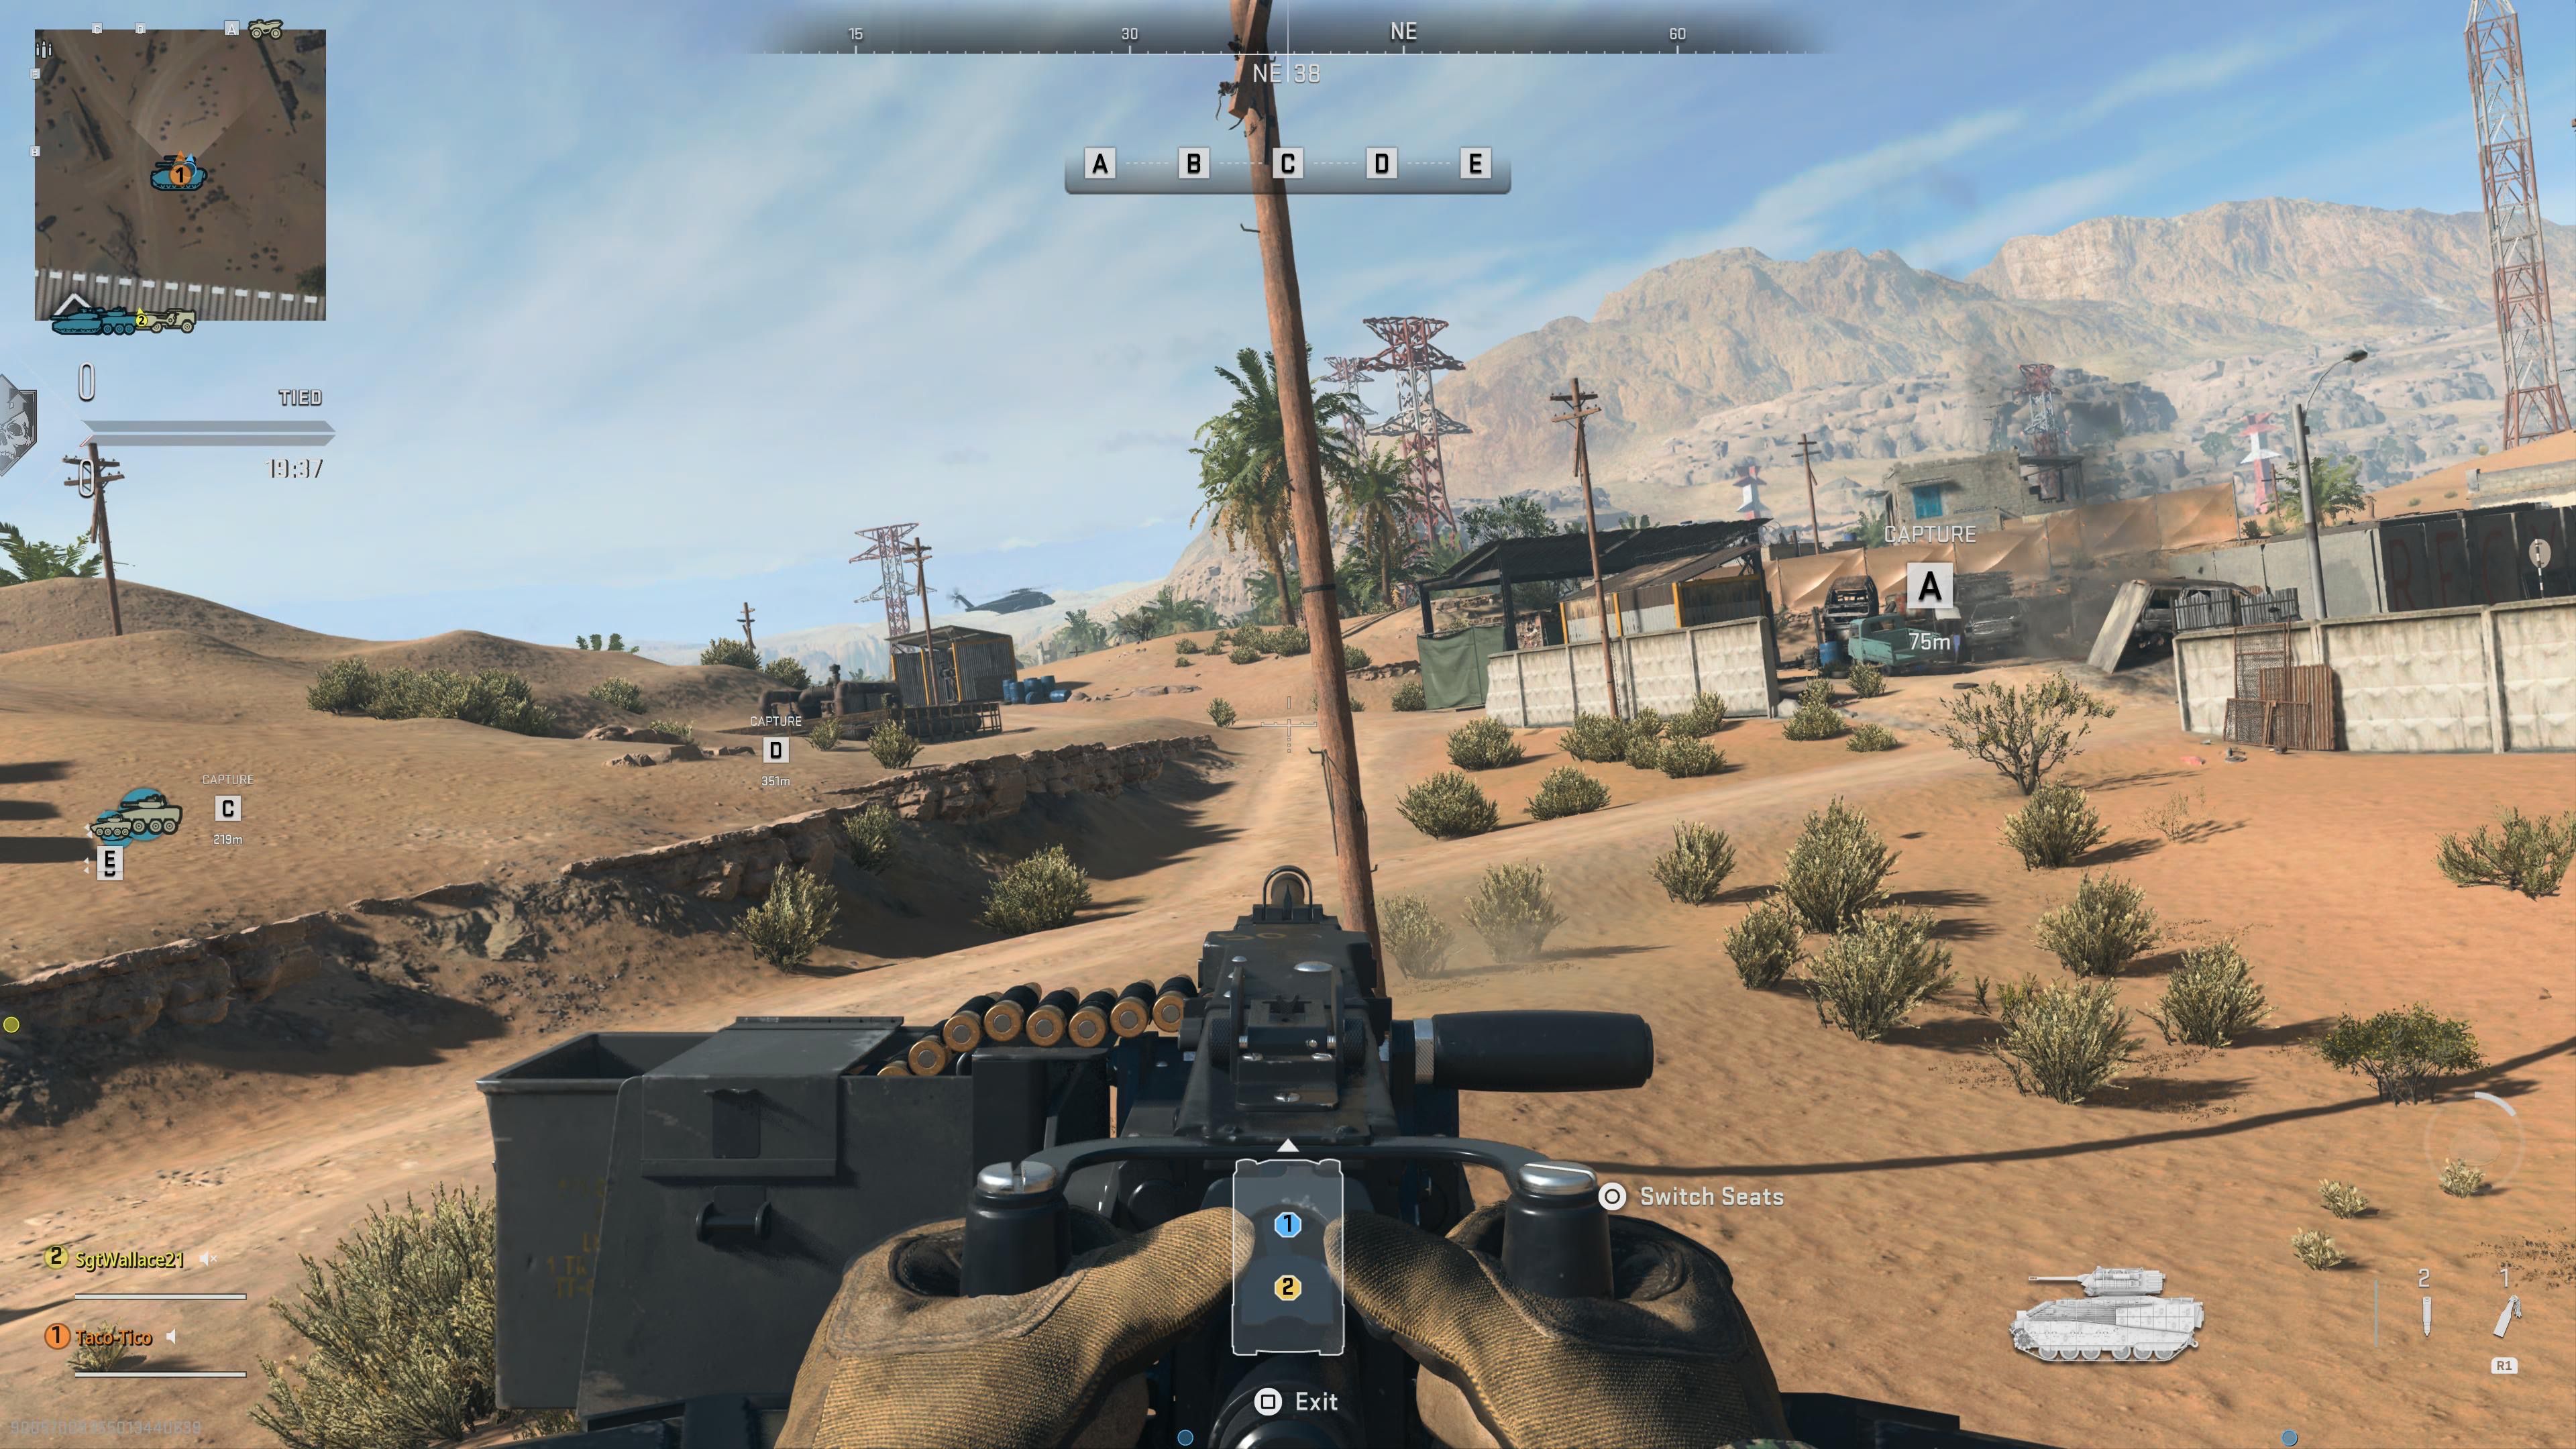 An in-match screenshot from Modern Warfare 2's Ground War mode, where the player is operating a turret atop a light tank.